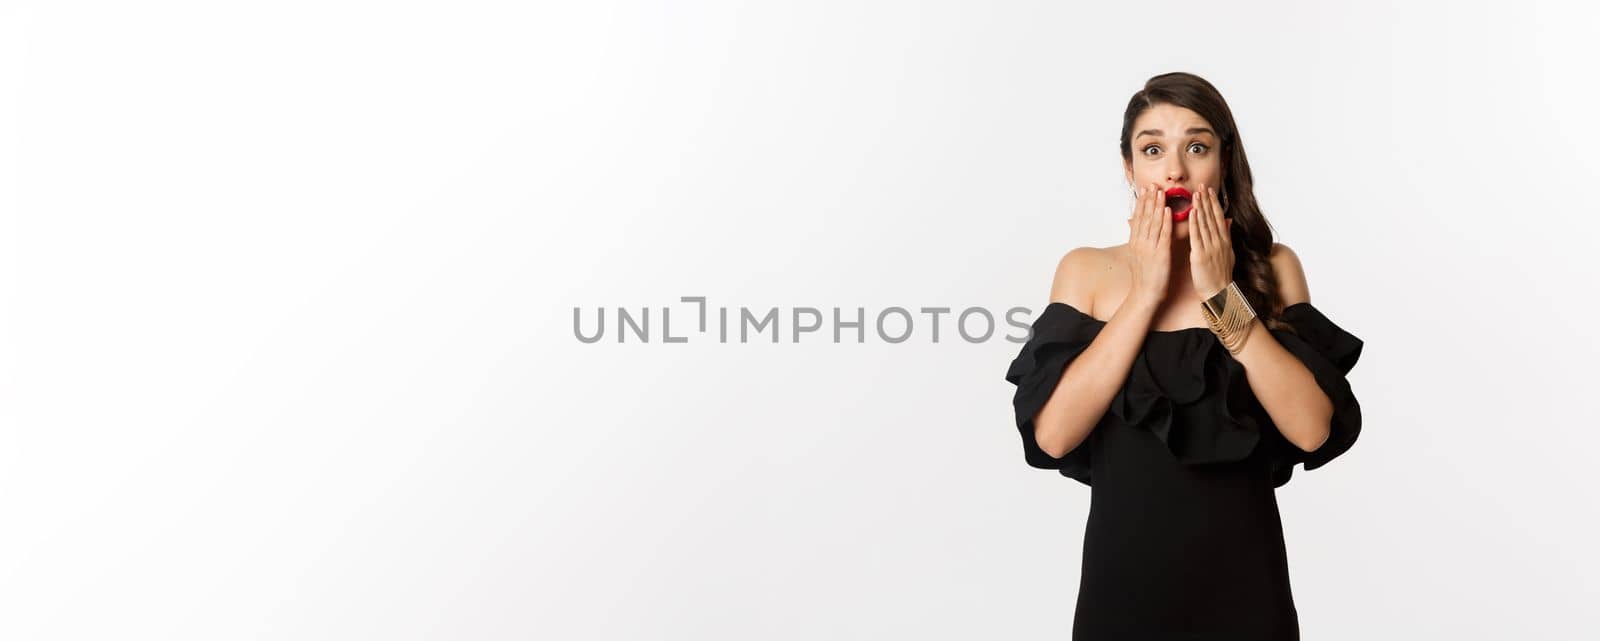 Fashion and beauty. Image of attractive female model in black dress reacting to announcement, looking amazed at camera, standing surprised over white background.